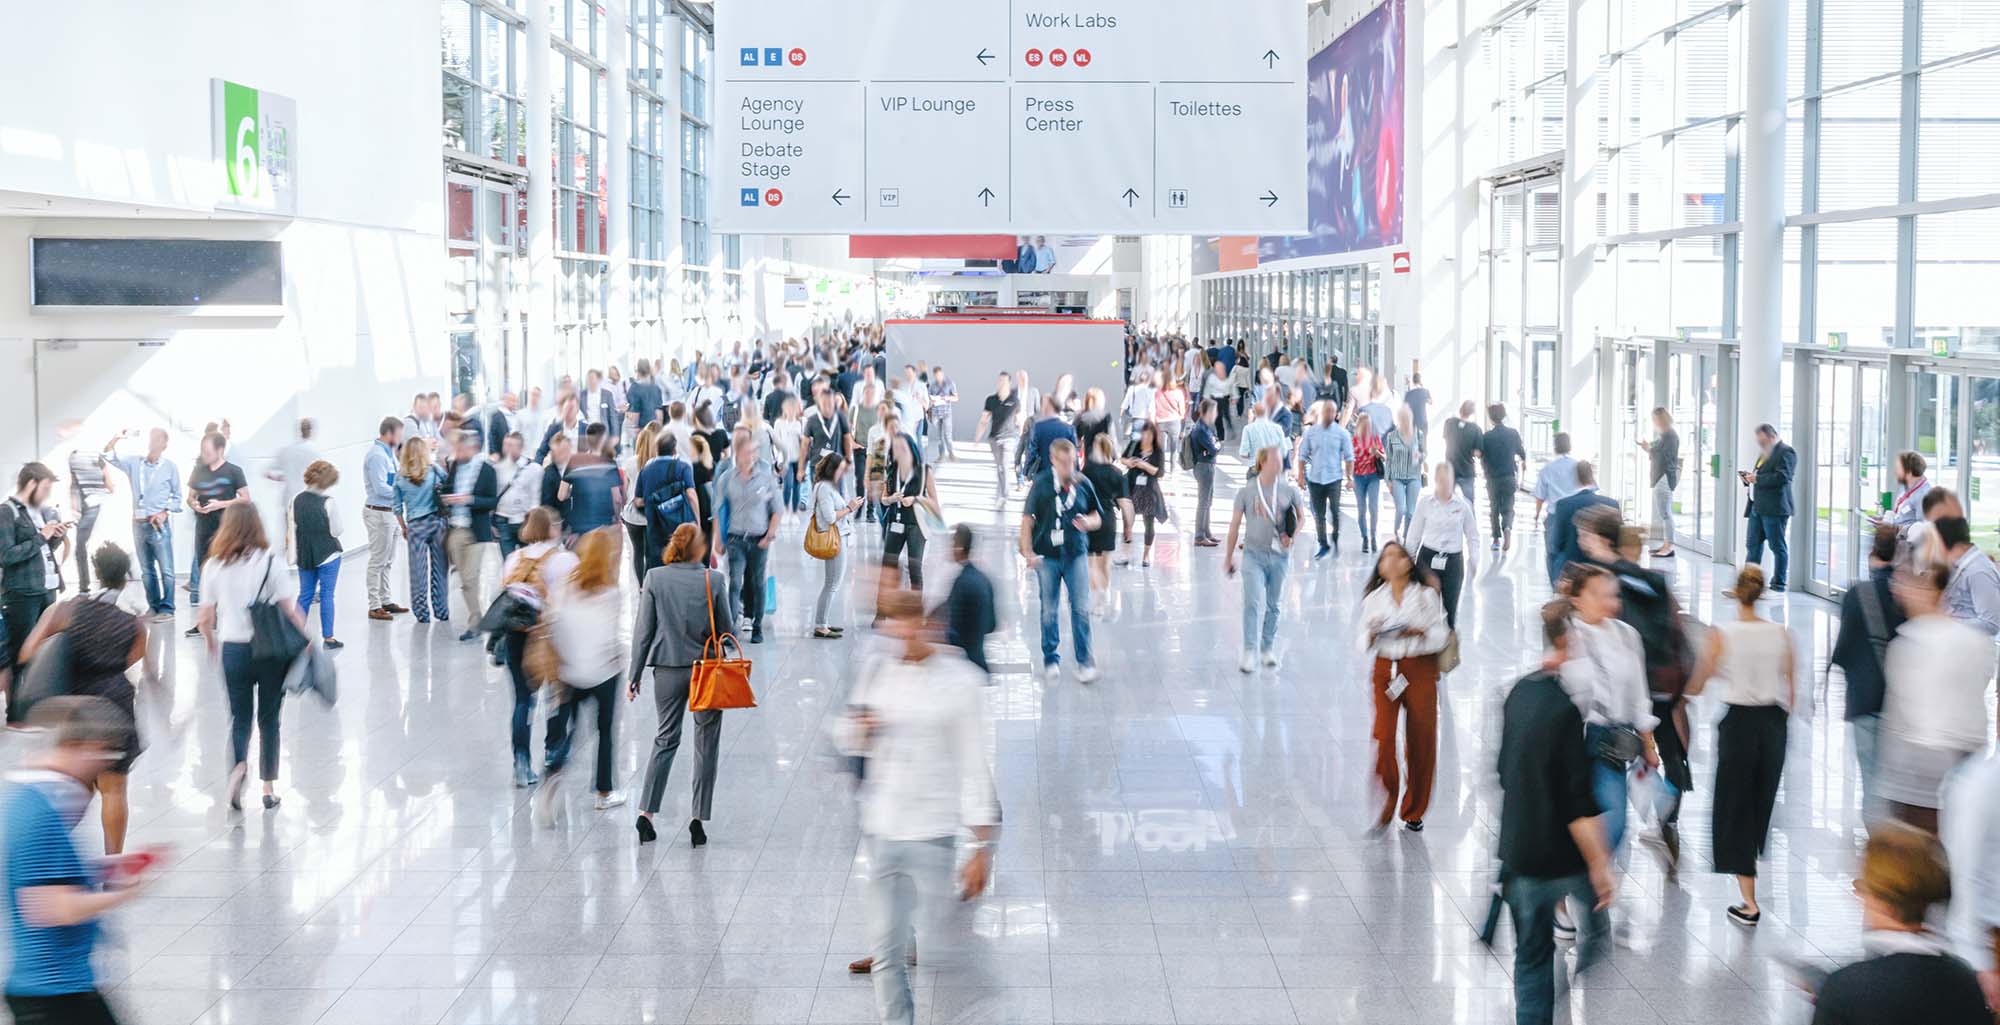 Trade shows are target-rich environments